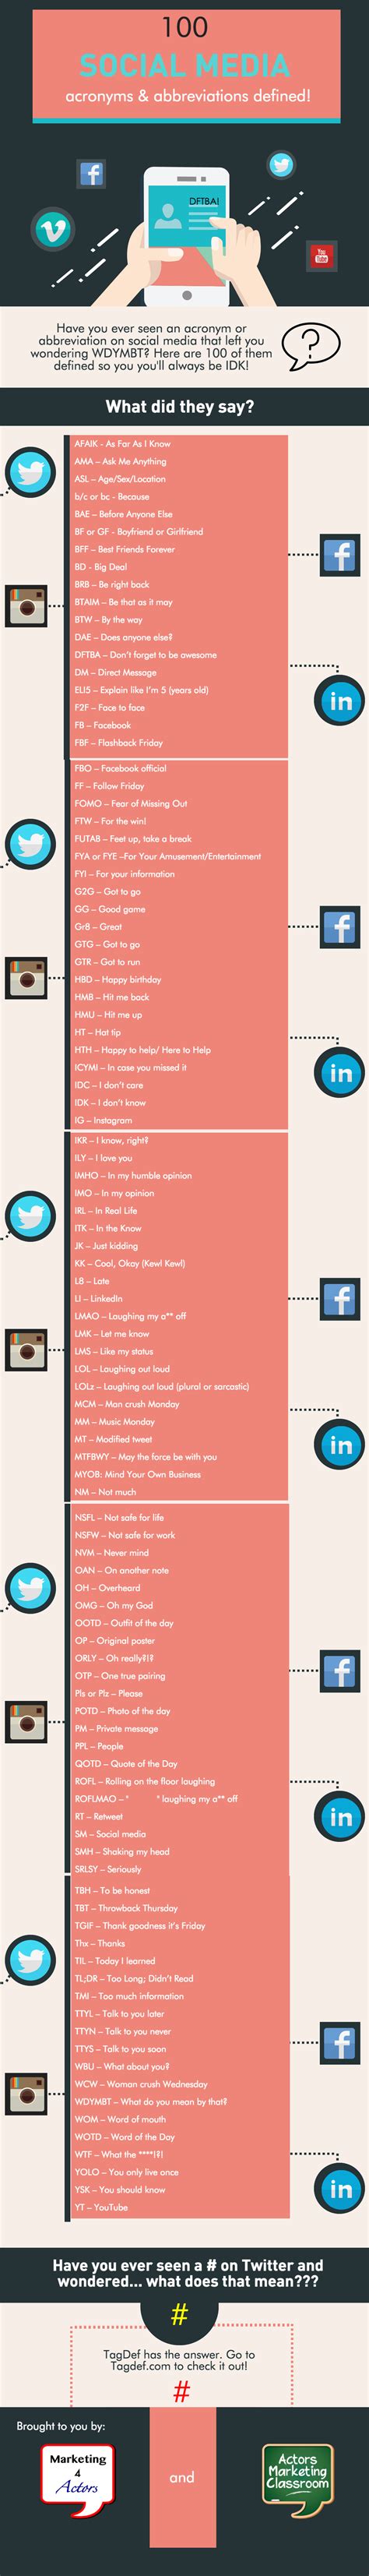 The Ultimate List Of Social Media Acronyms And Abbrev